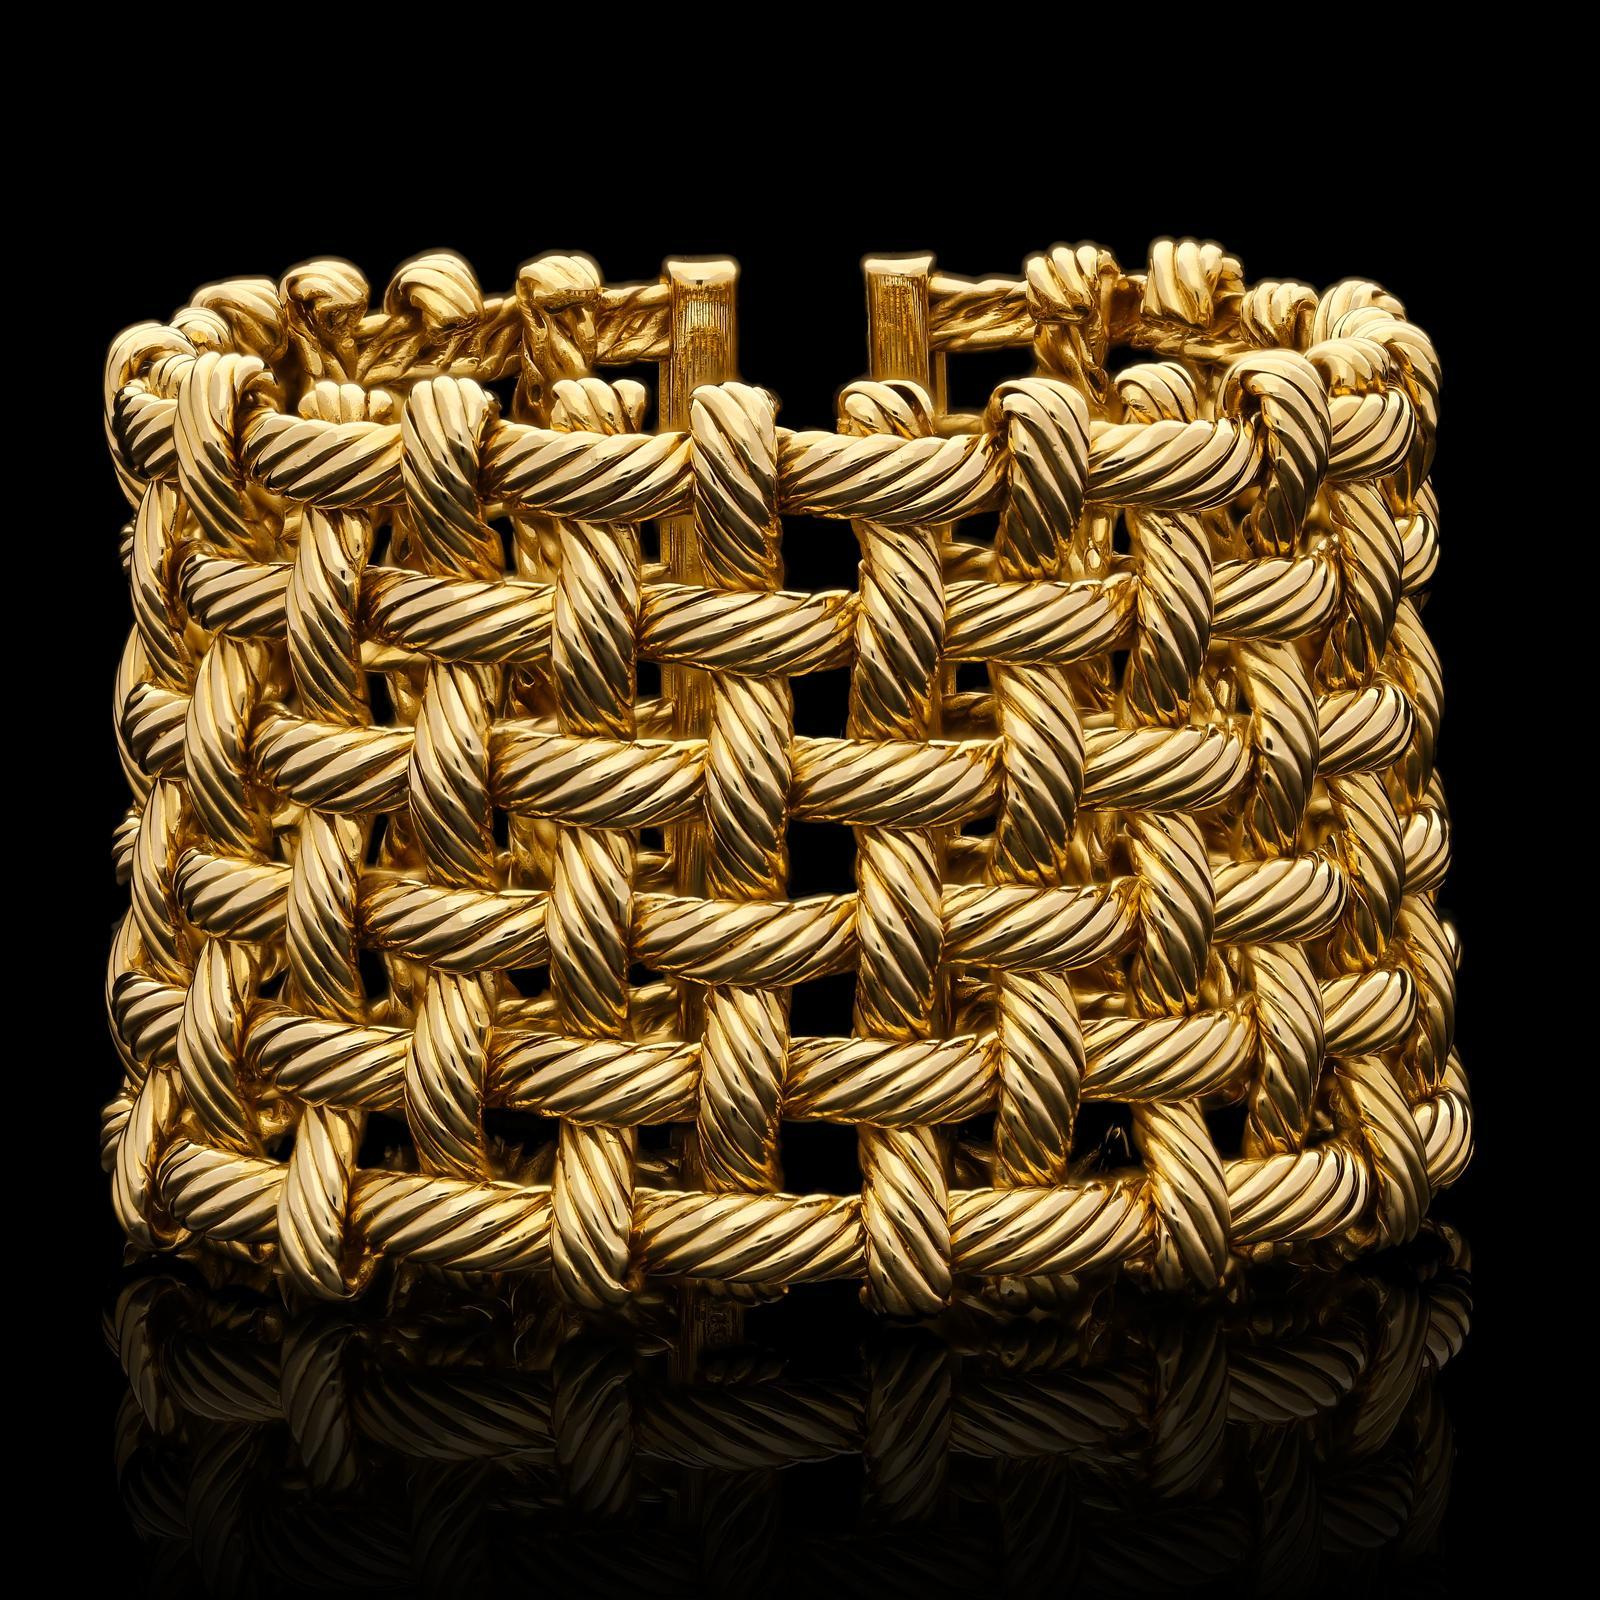 Description
A wonderful wide French gold cuff bracelet by Hermes c.2000s, the bracelet of open work basket weave design with a textured twist finish to the gold, the twenty three upright strands are interwoven with six horizontal strands in a loose